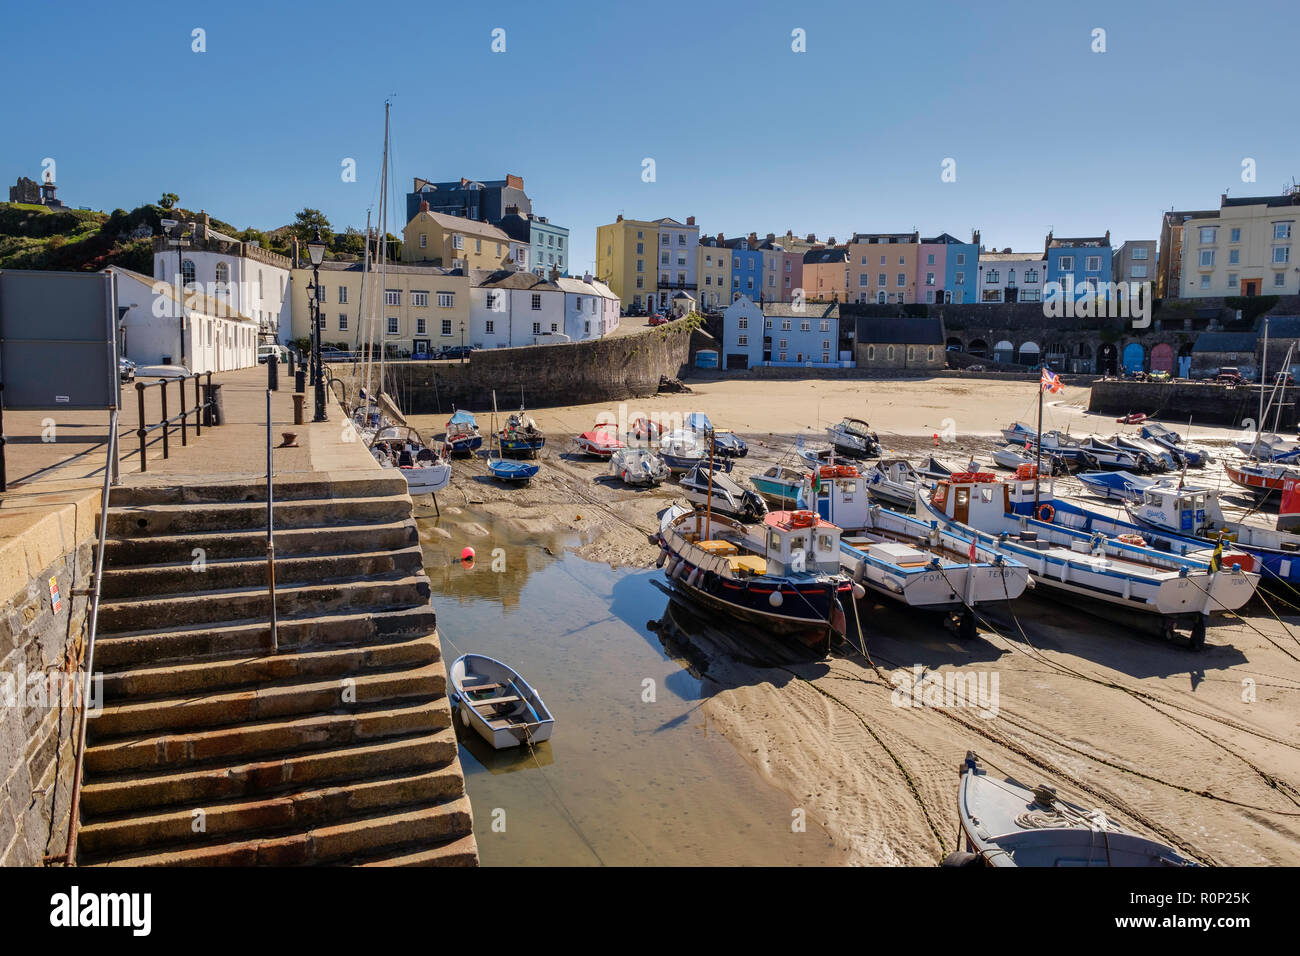 BOATS IN TENBY HARBOUR PEMBROKESHIRE Stock Photo